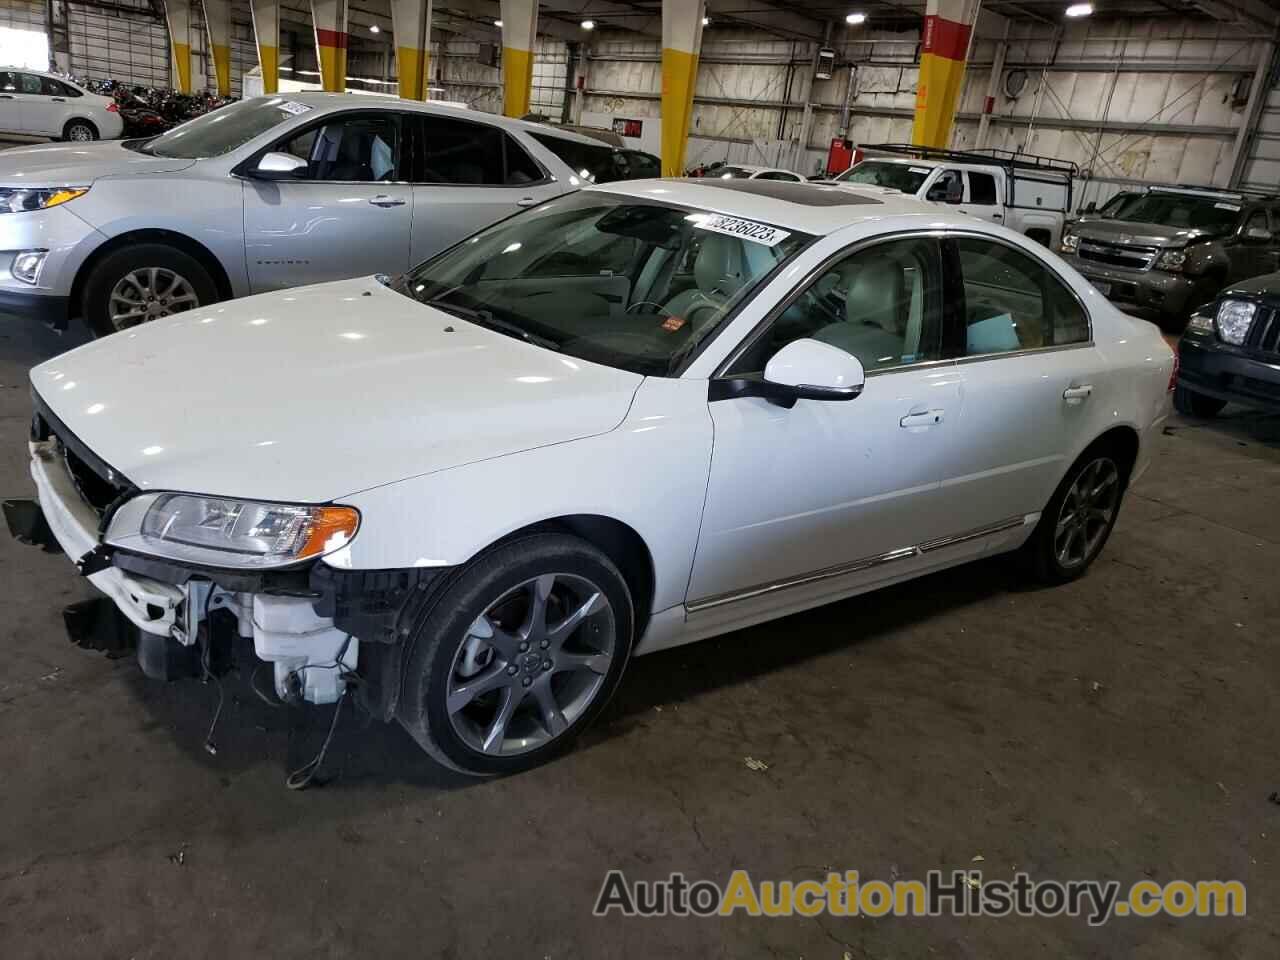 VOLVO S80 3.2, YV1940AS1C1159825